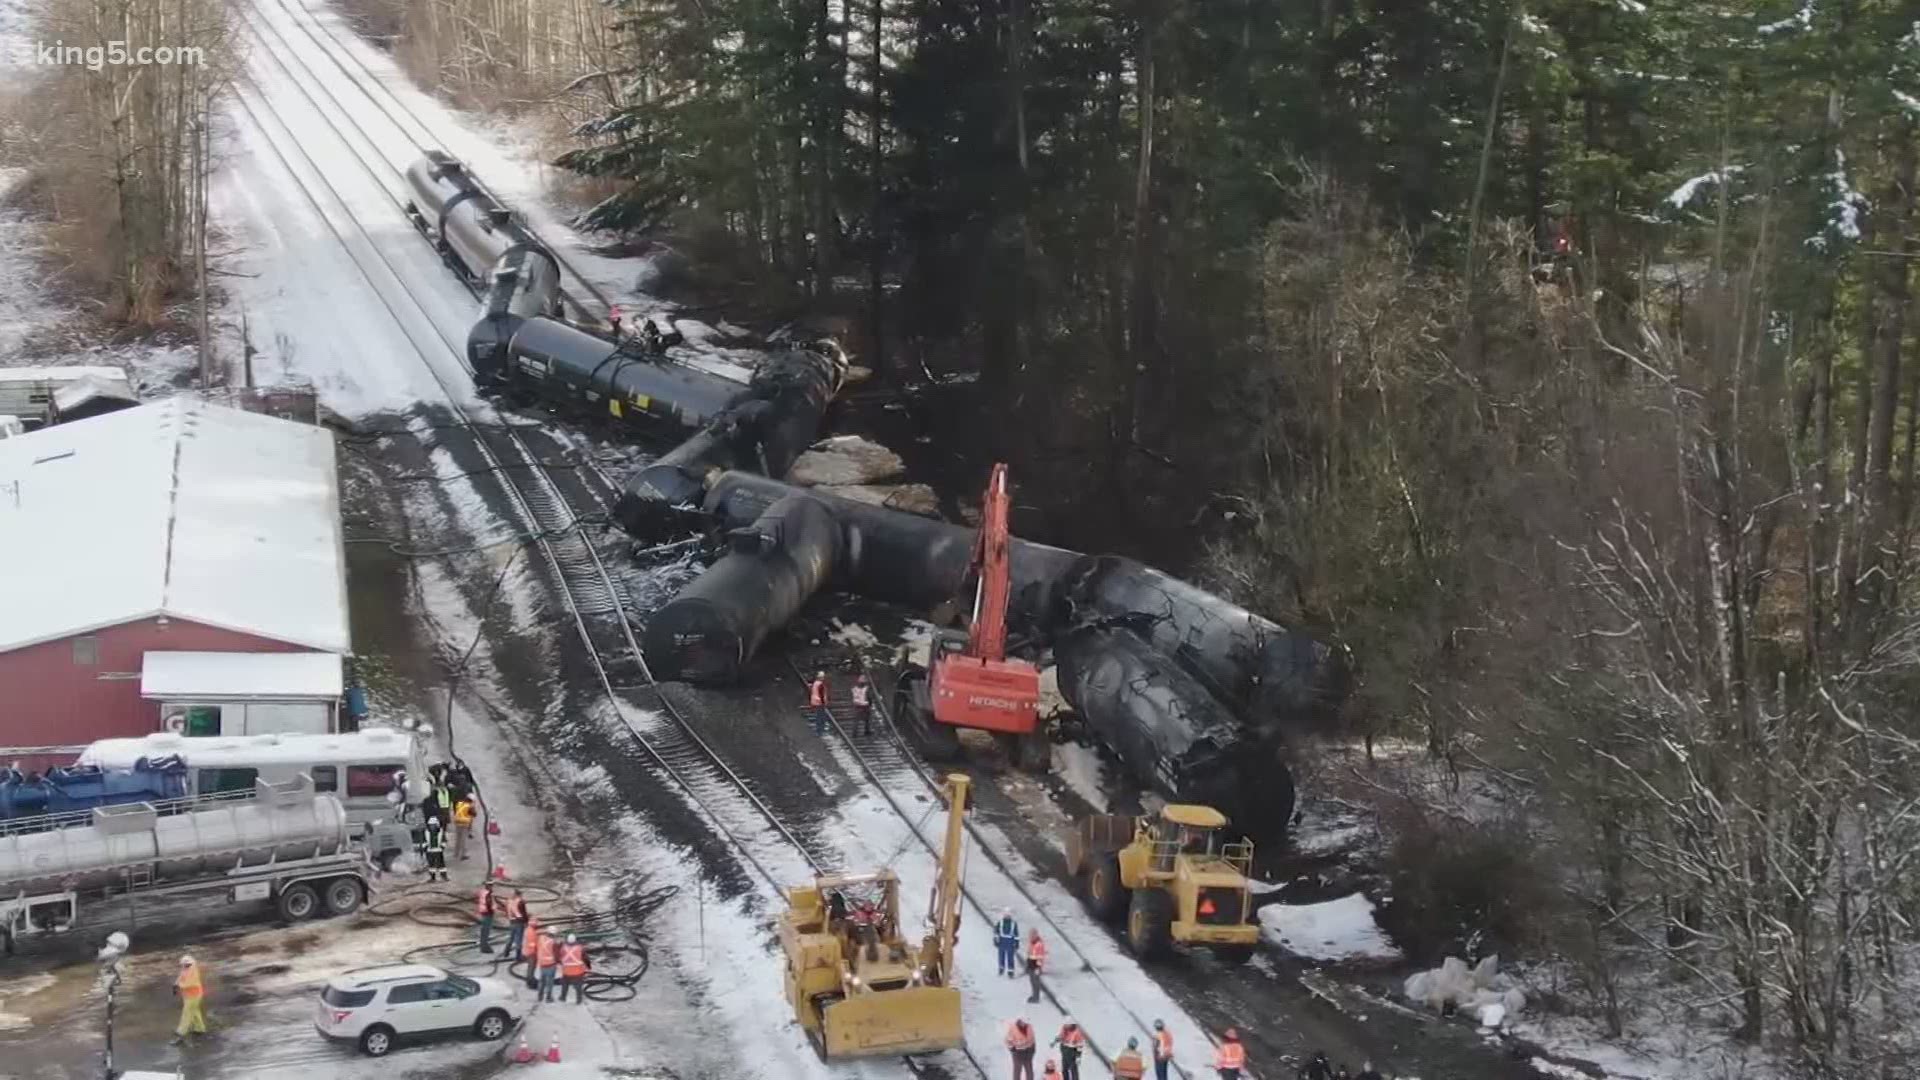 Washington Department of Ecology officials say there's been no impacts to wildlife and they do not believe oil flowed into any waterways or bodies of water.